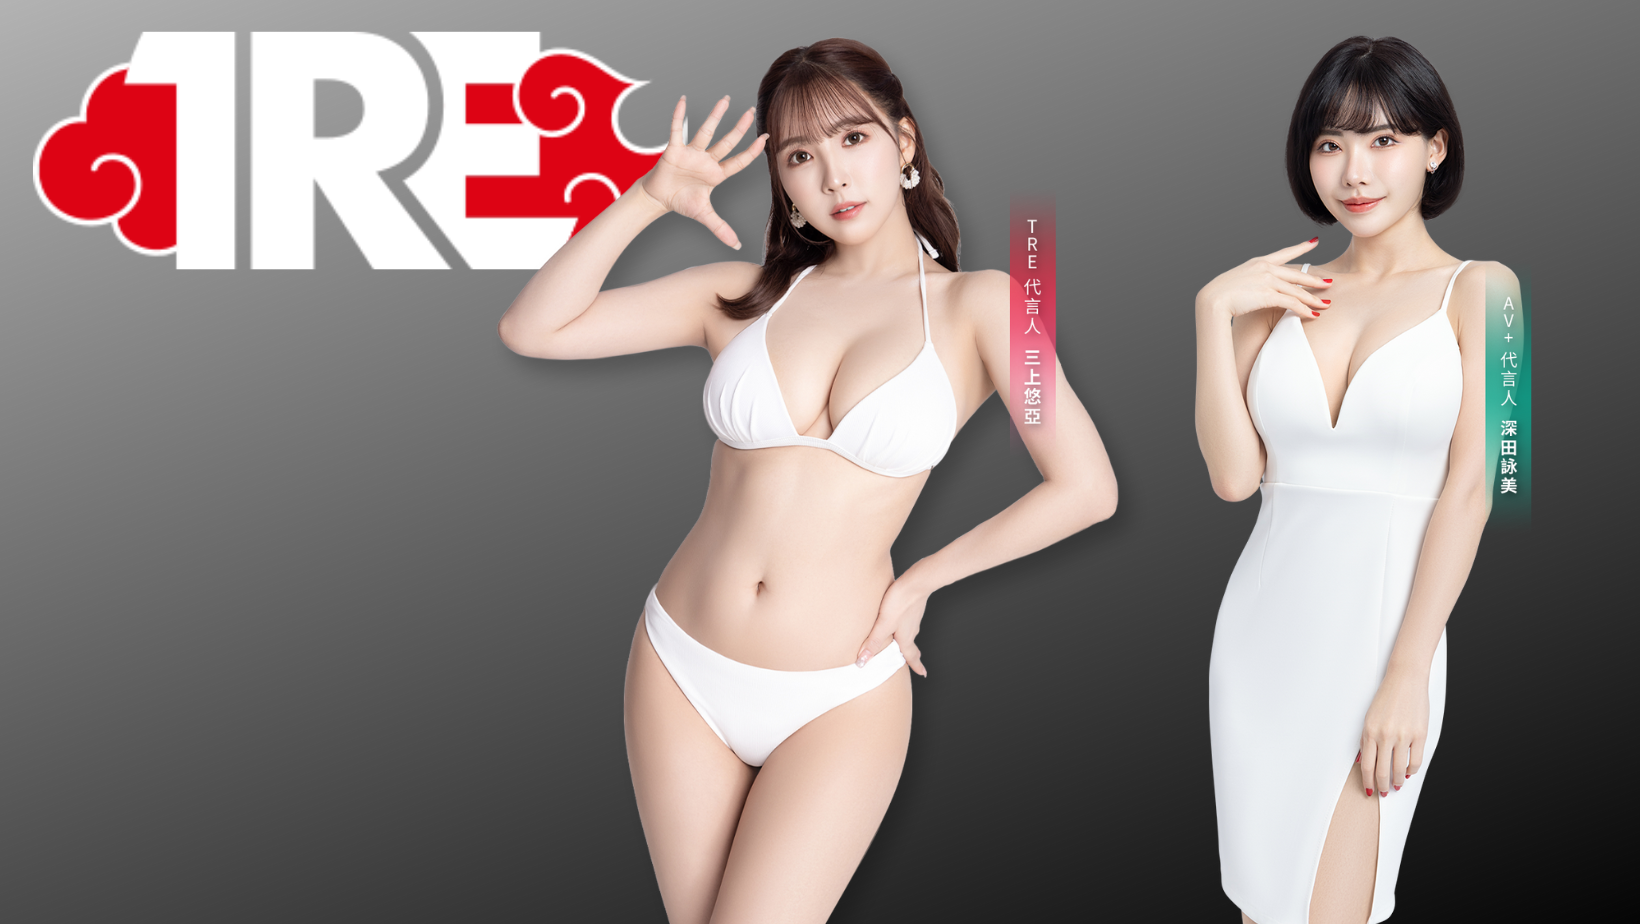 Featured image for TRE - 台北国際成人展 (TAIPEI RED EXPO) に参加したAV女優